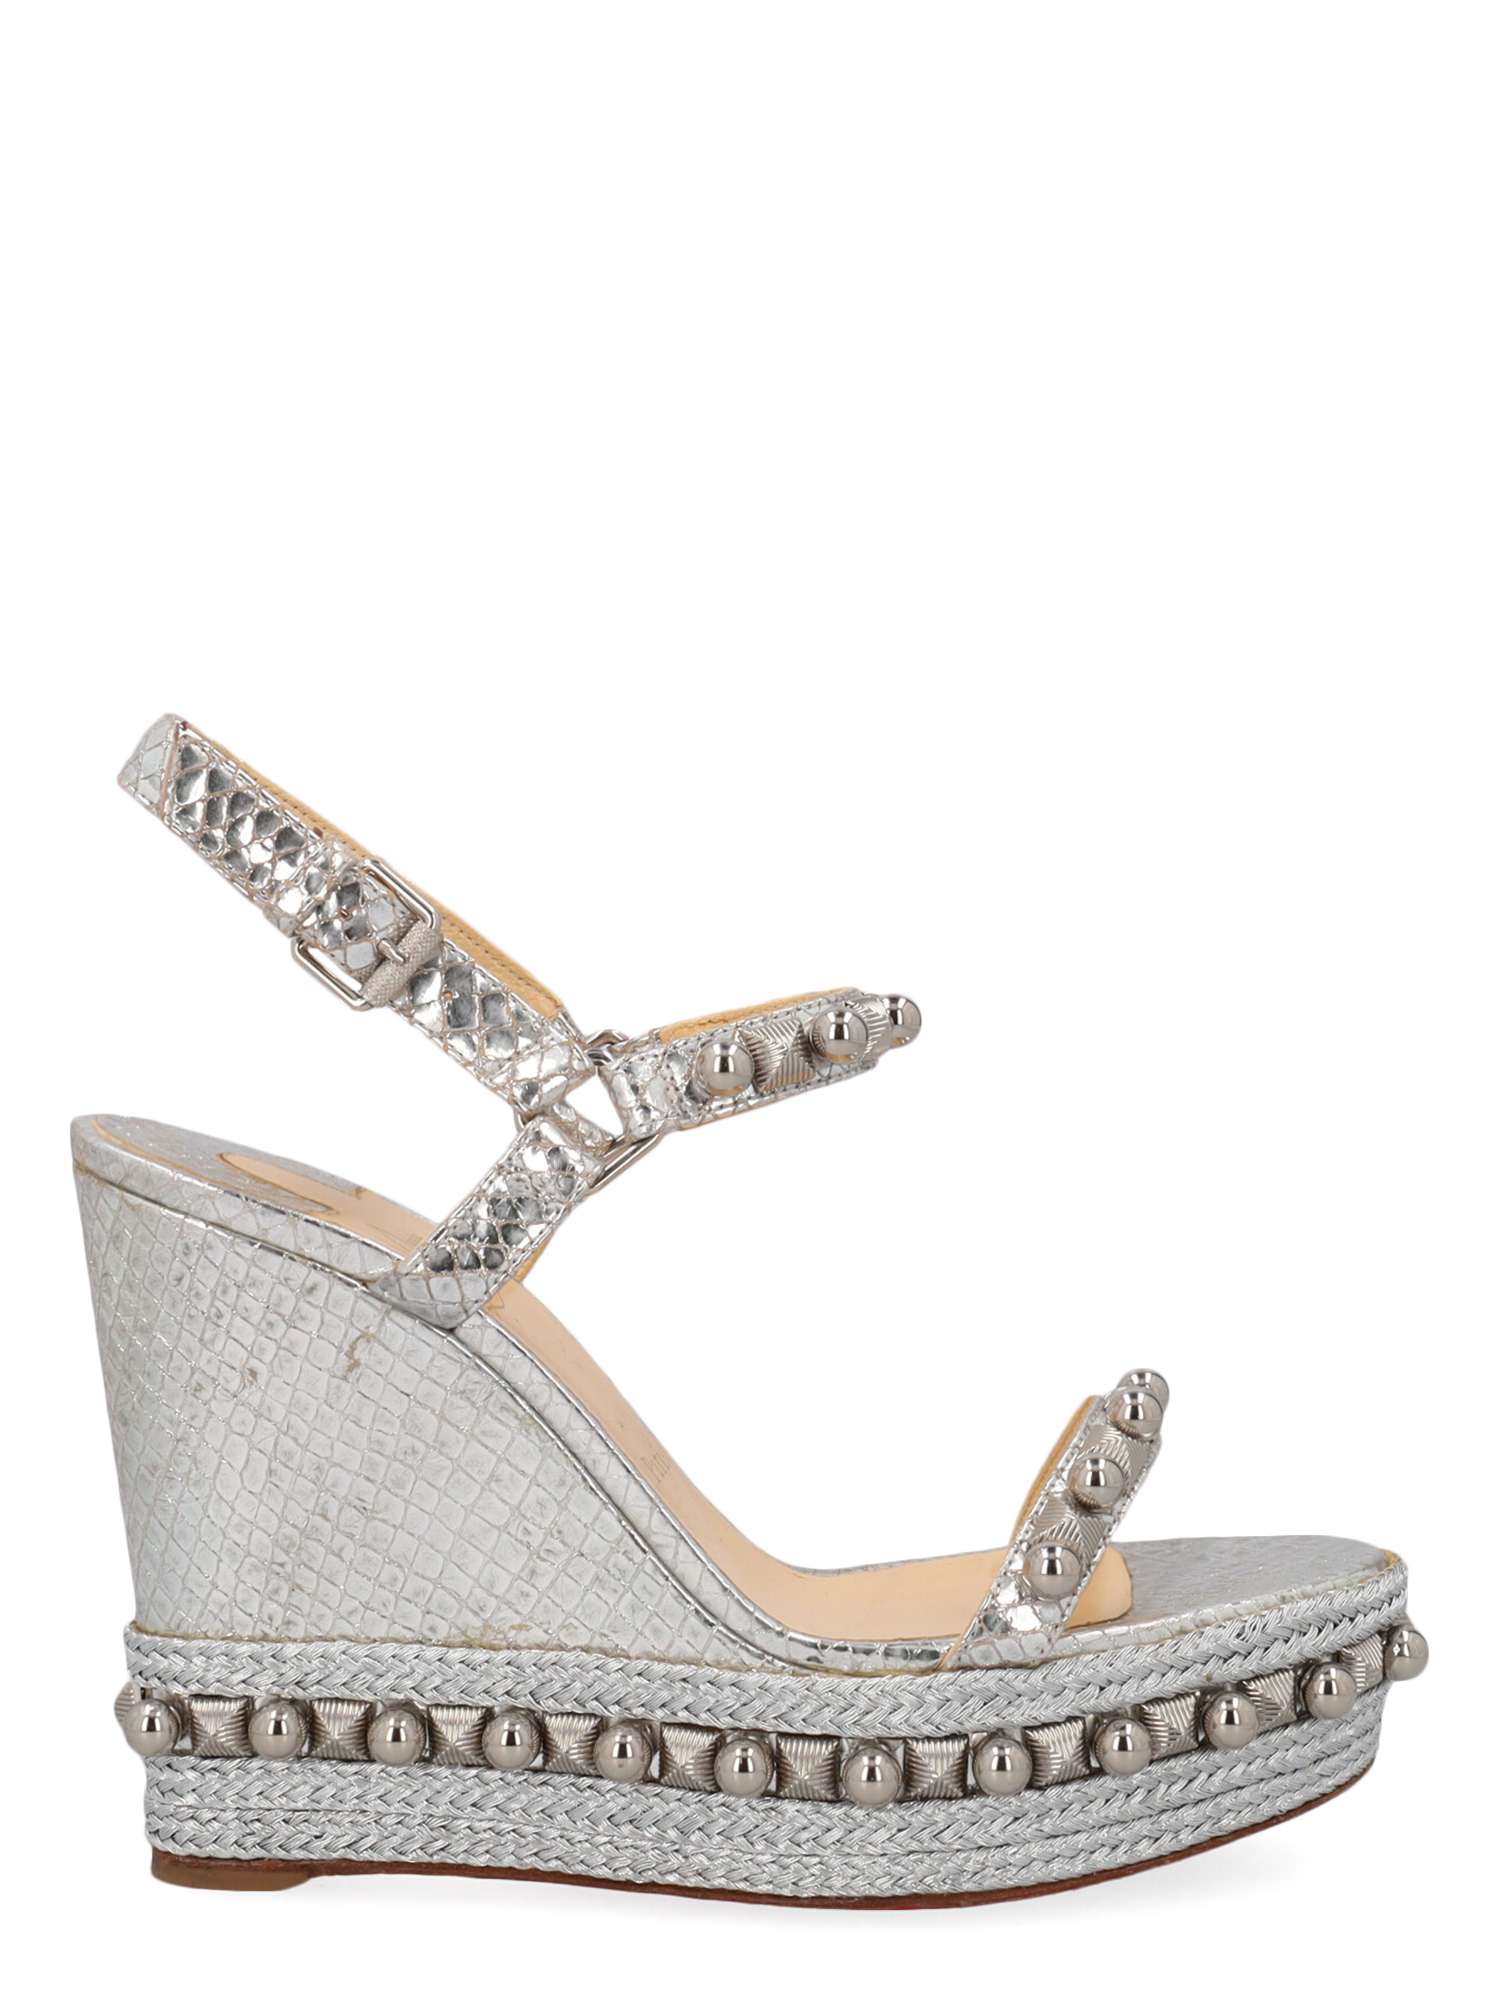 Pre-owned Christian Louboutin Women's Wedges -  - In Silver Leather